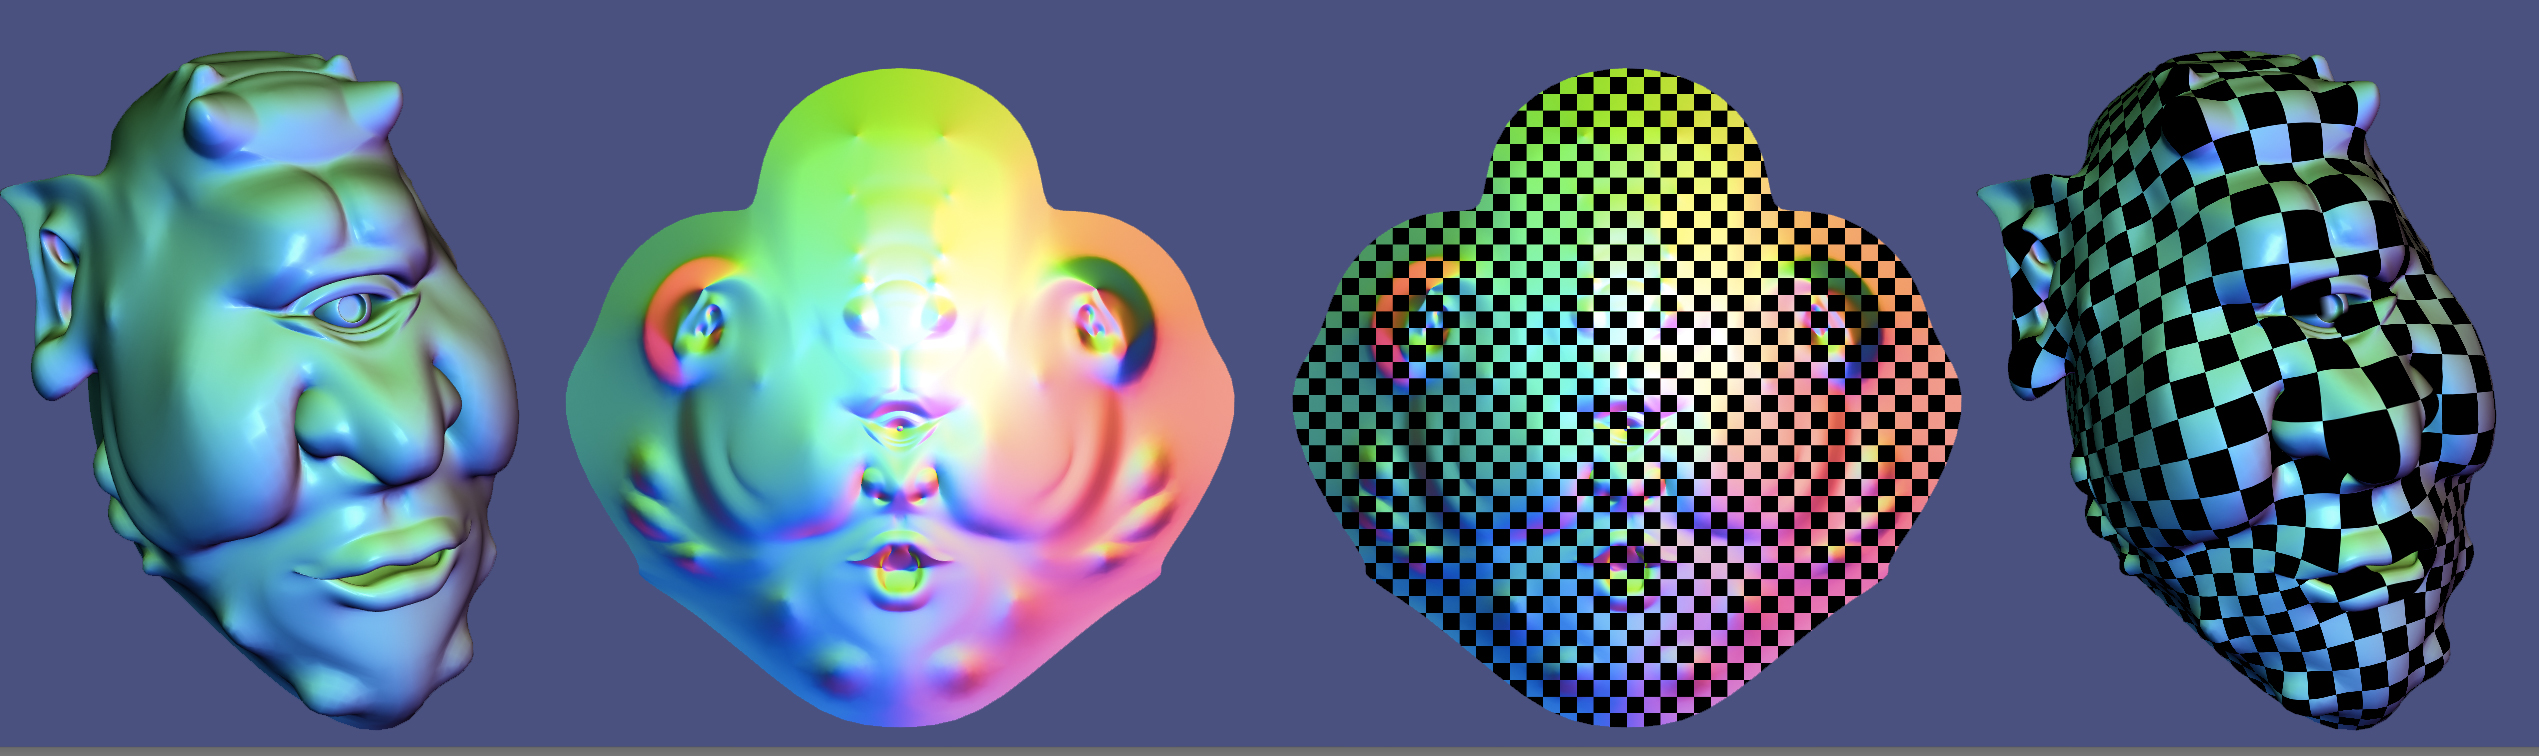 The least squares conformal mapping of the 3D Ogre mesh with natural boundary conditions produces a more smooth, less distorted and canonically aligned parameterization than the Tutte embedding above.